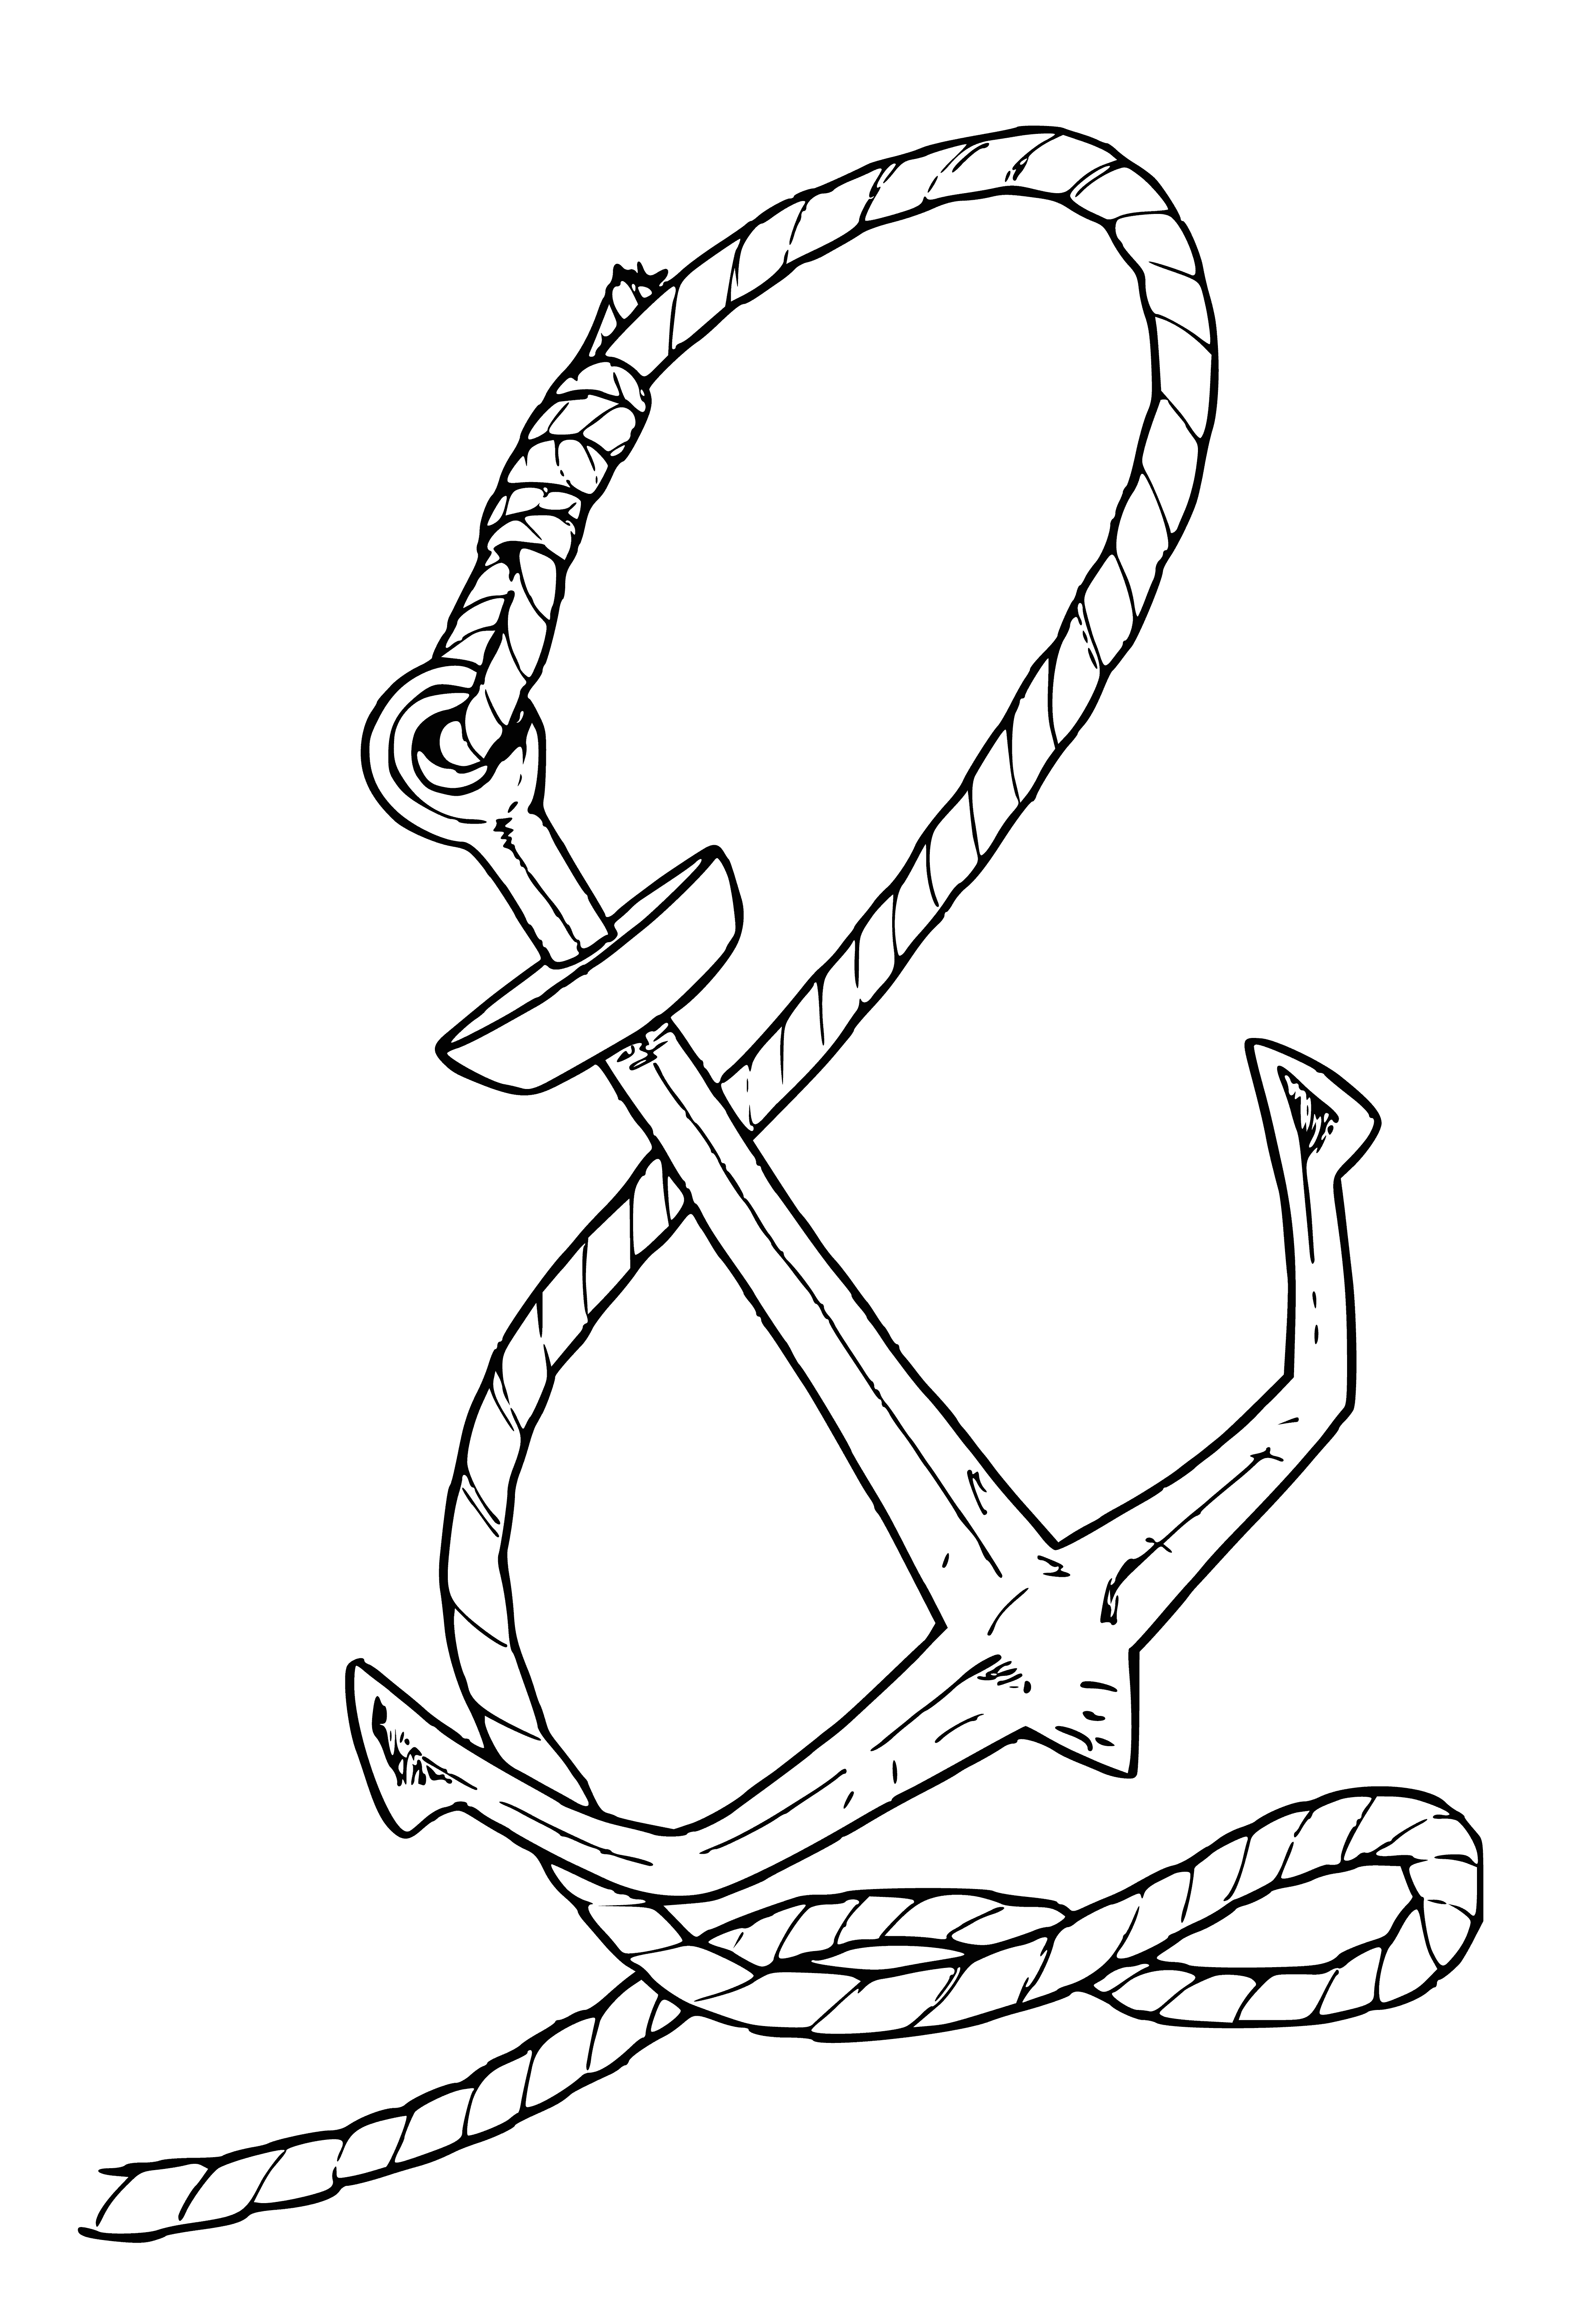 Anchor coloring page